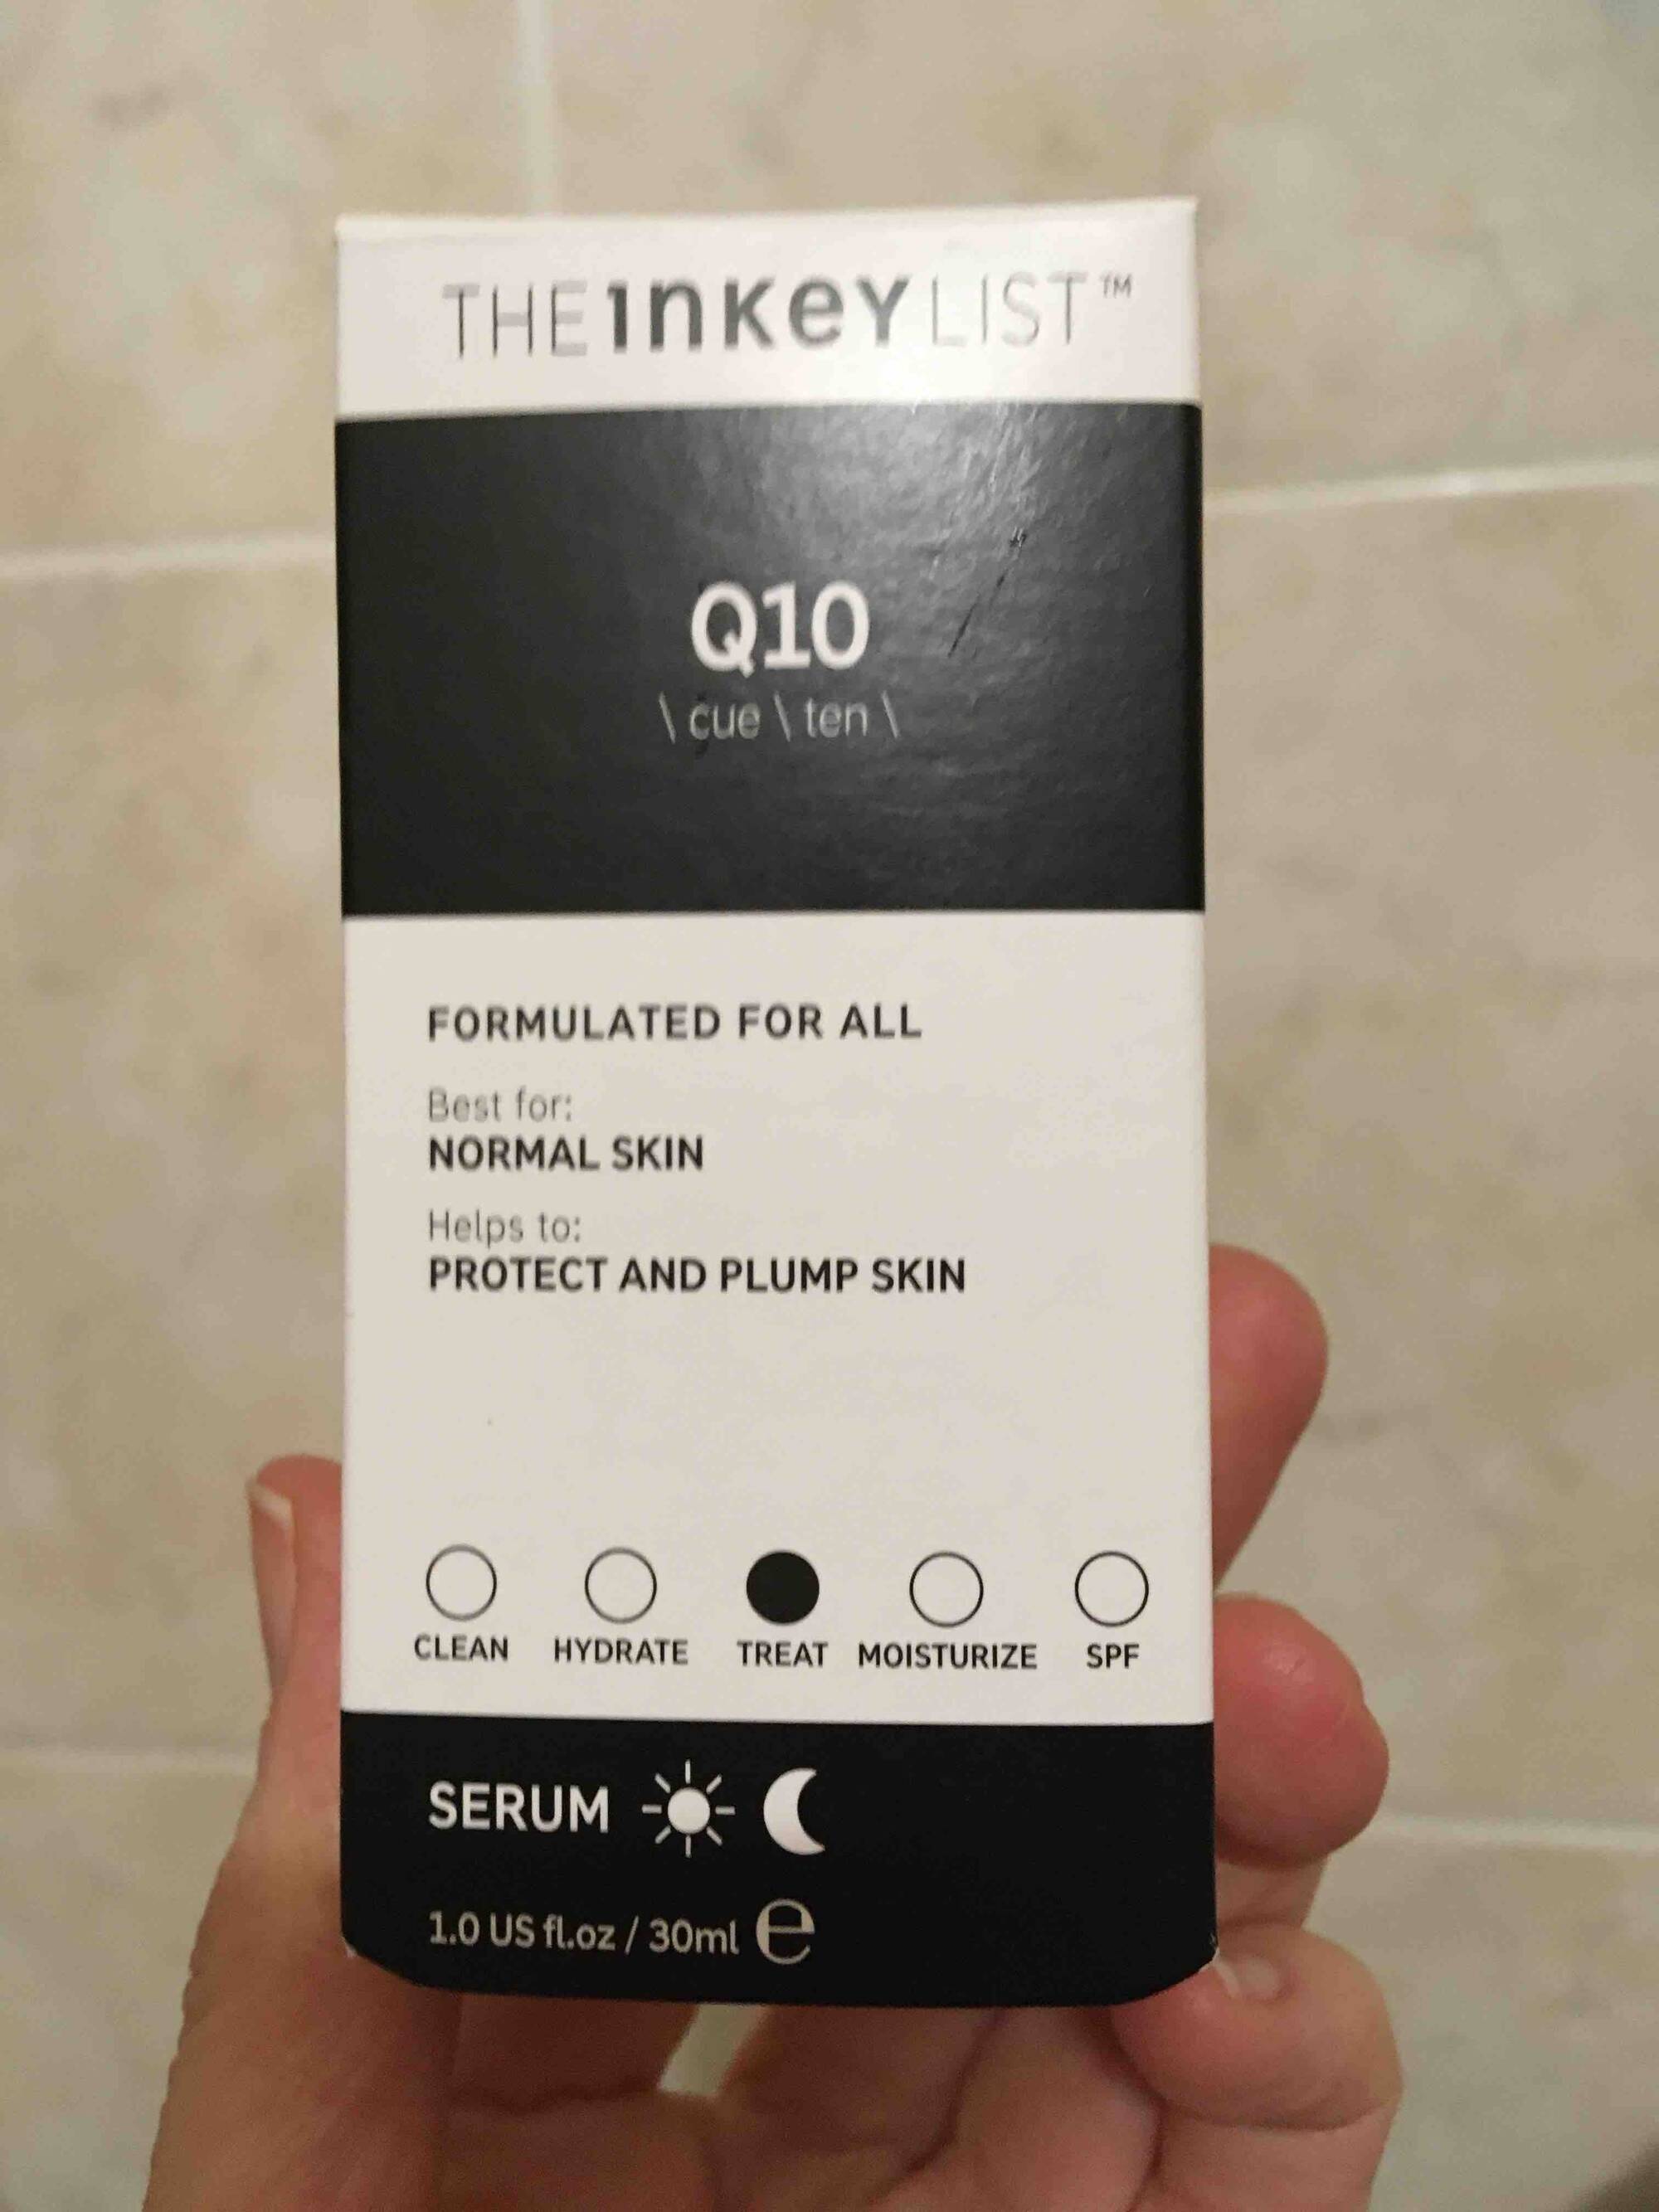 THE INKEY LIST - Q10 Serum formulated for all